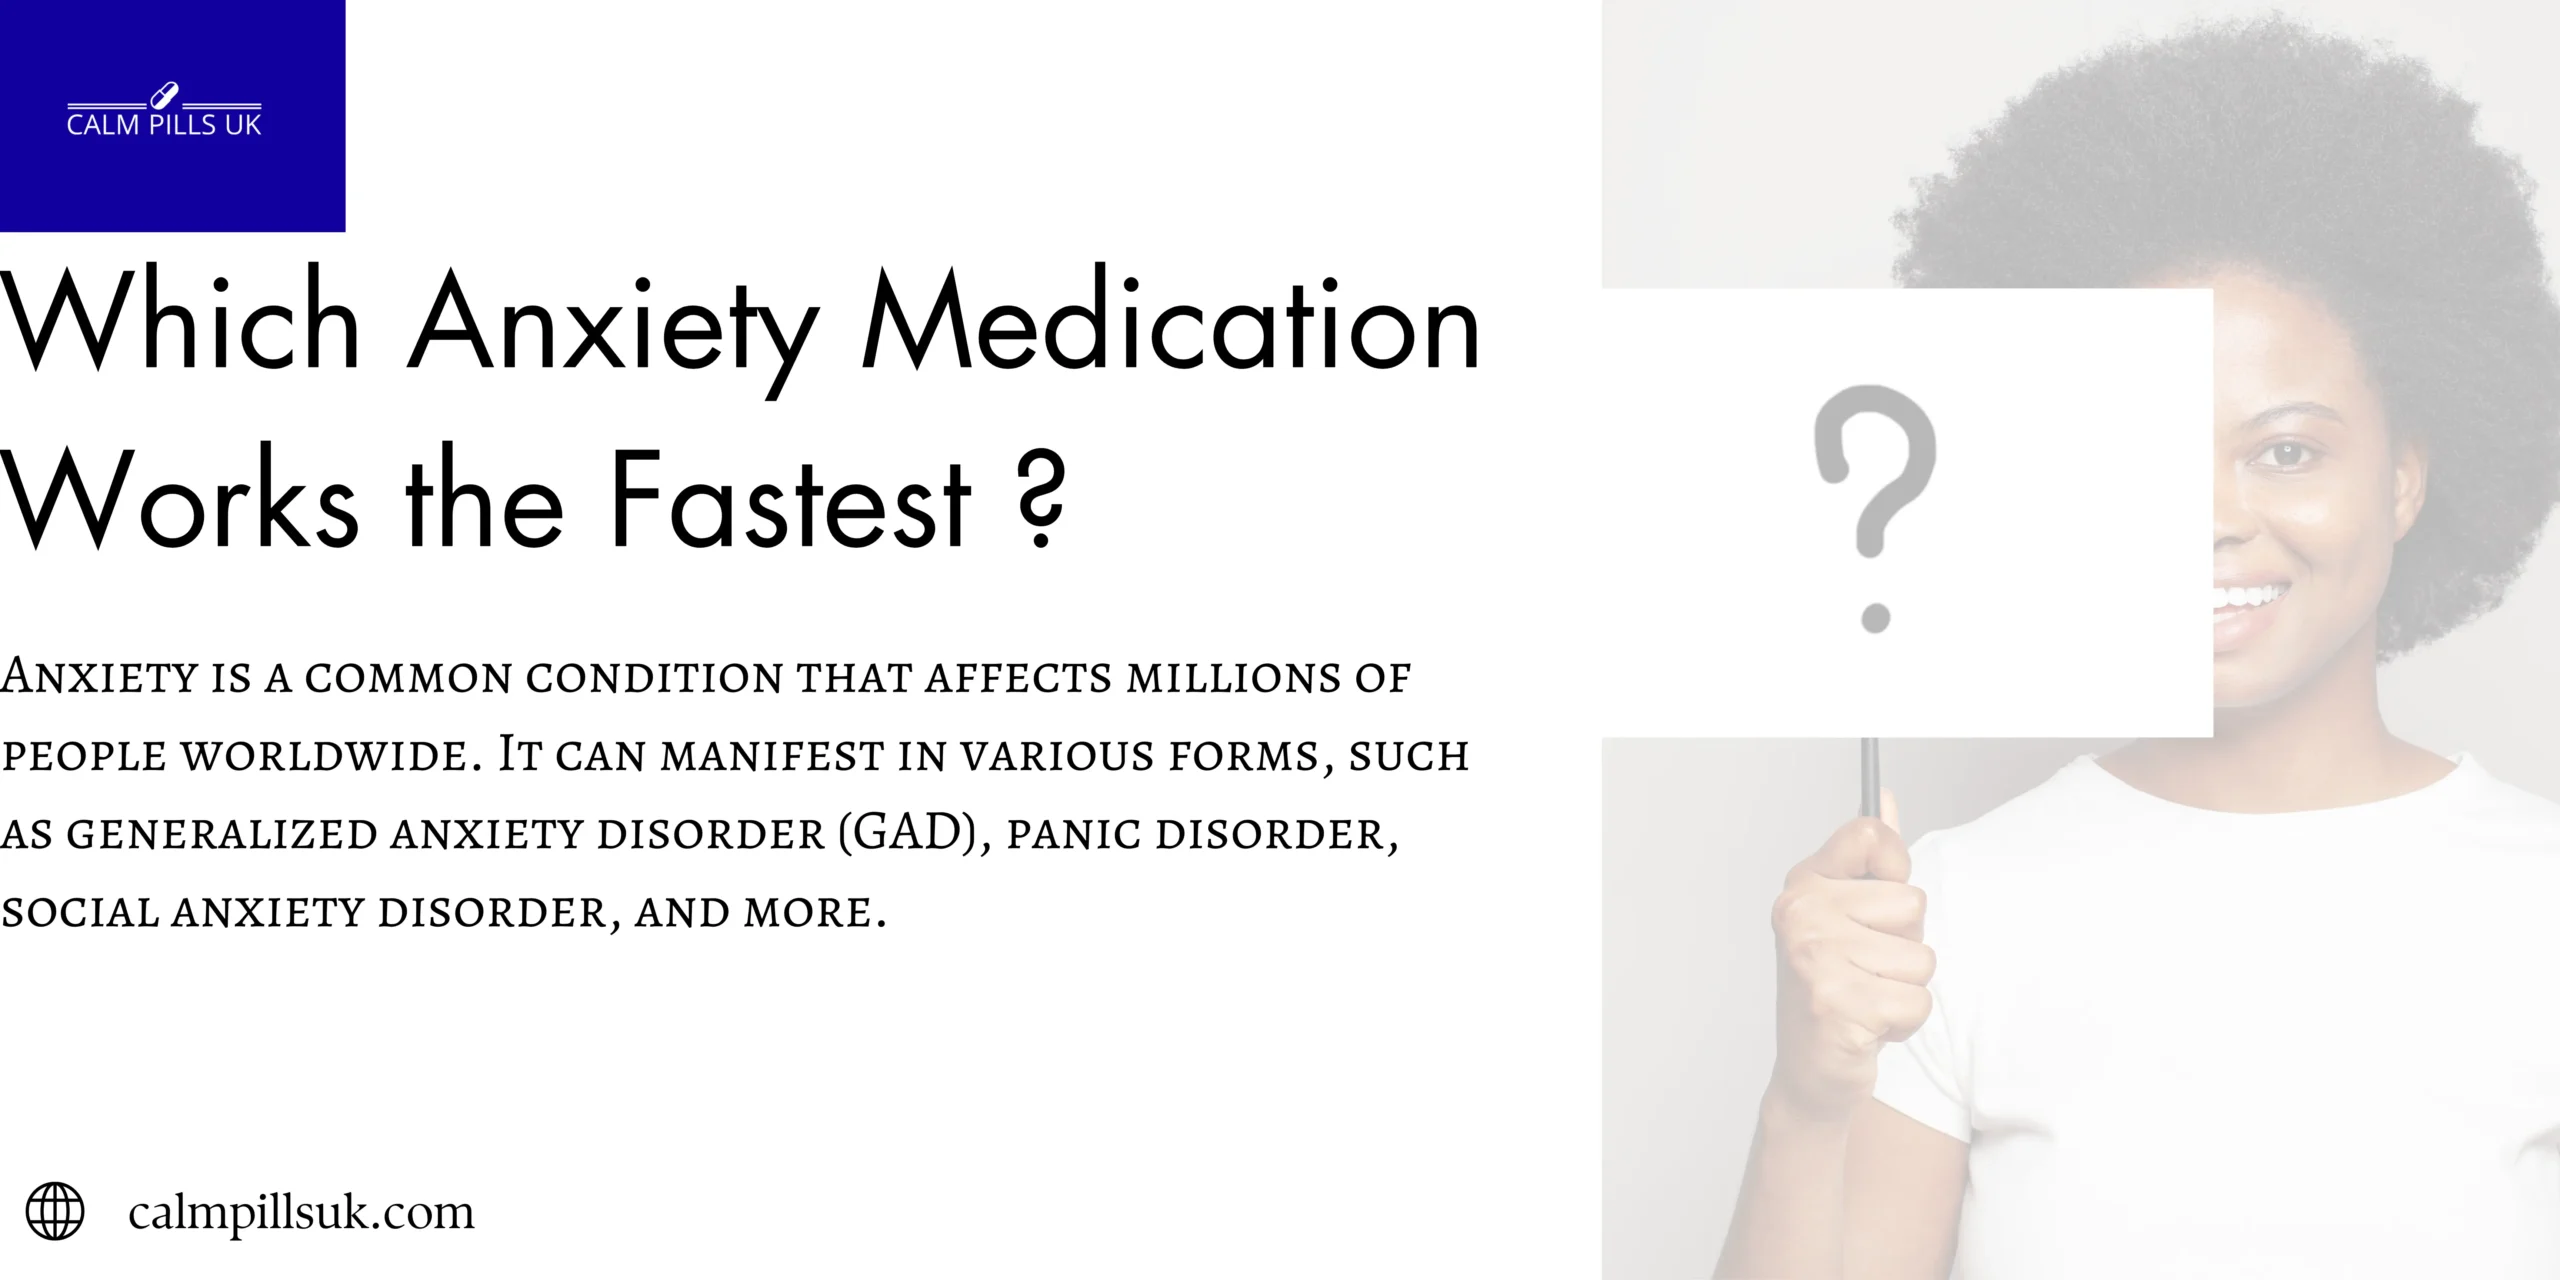 Which Anxiety Medication Works the Fastest?